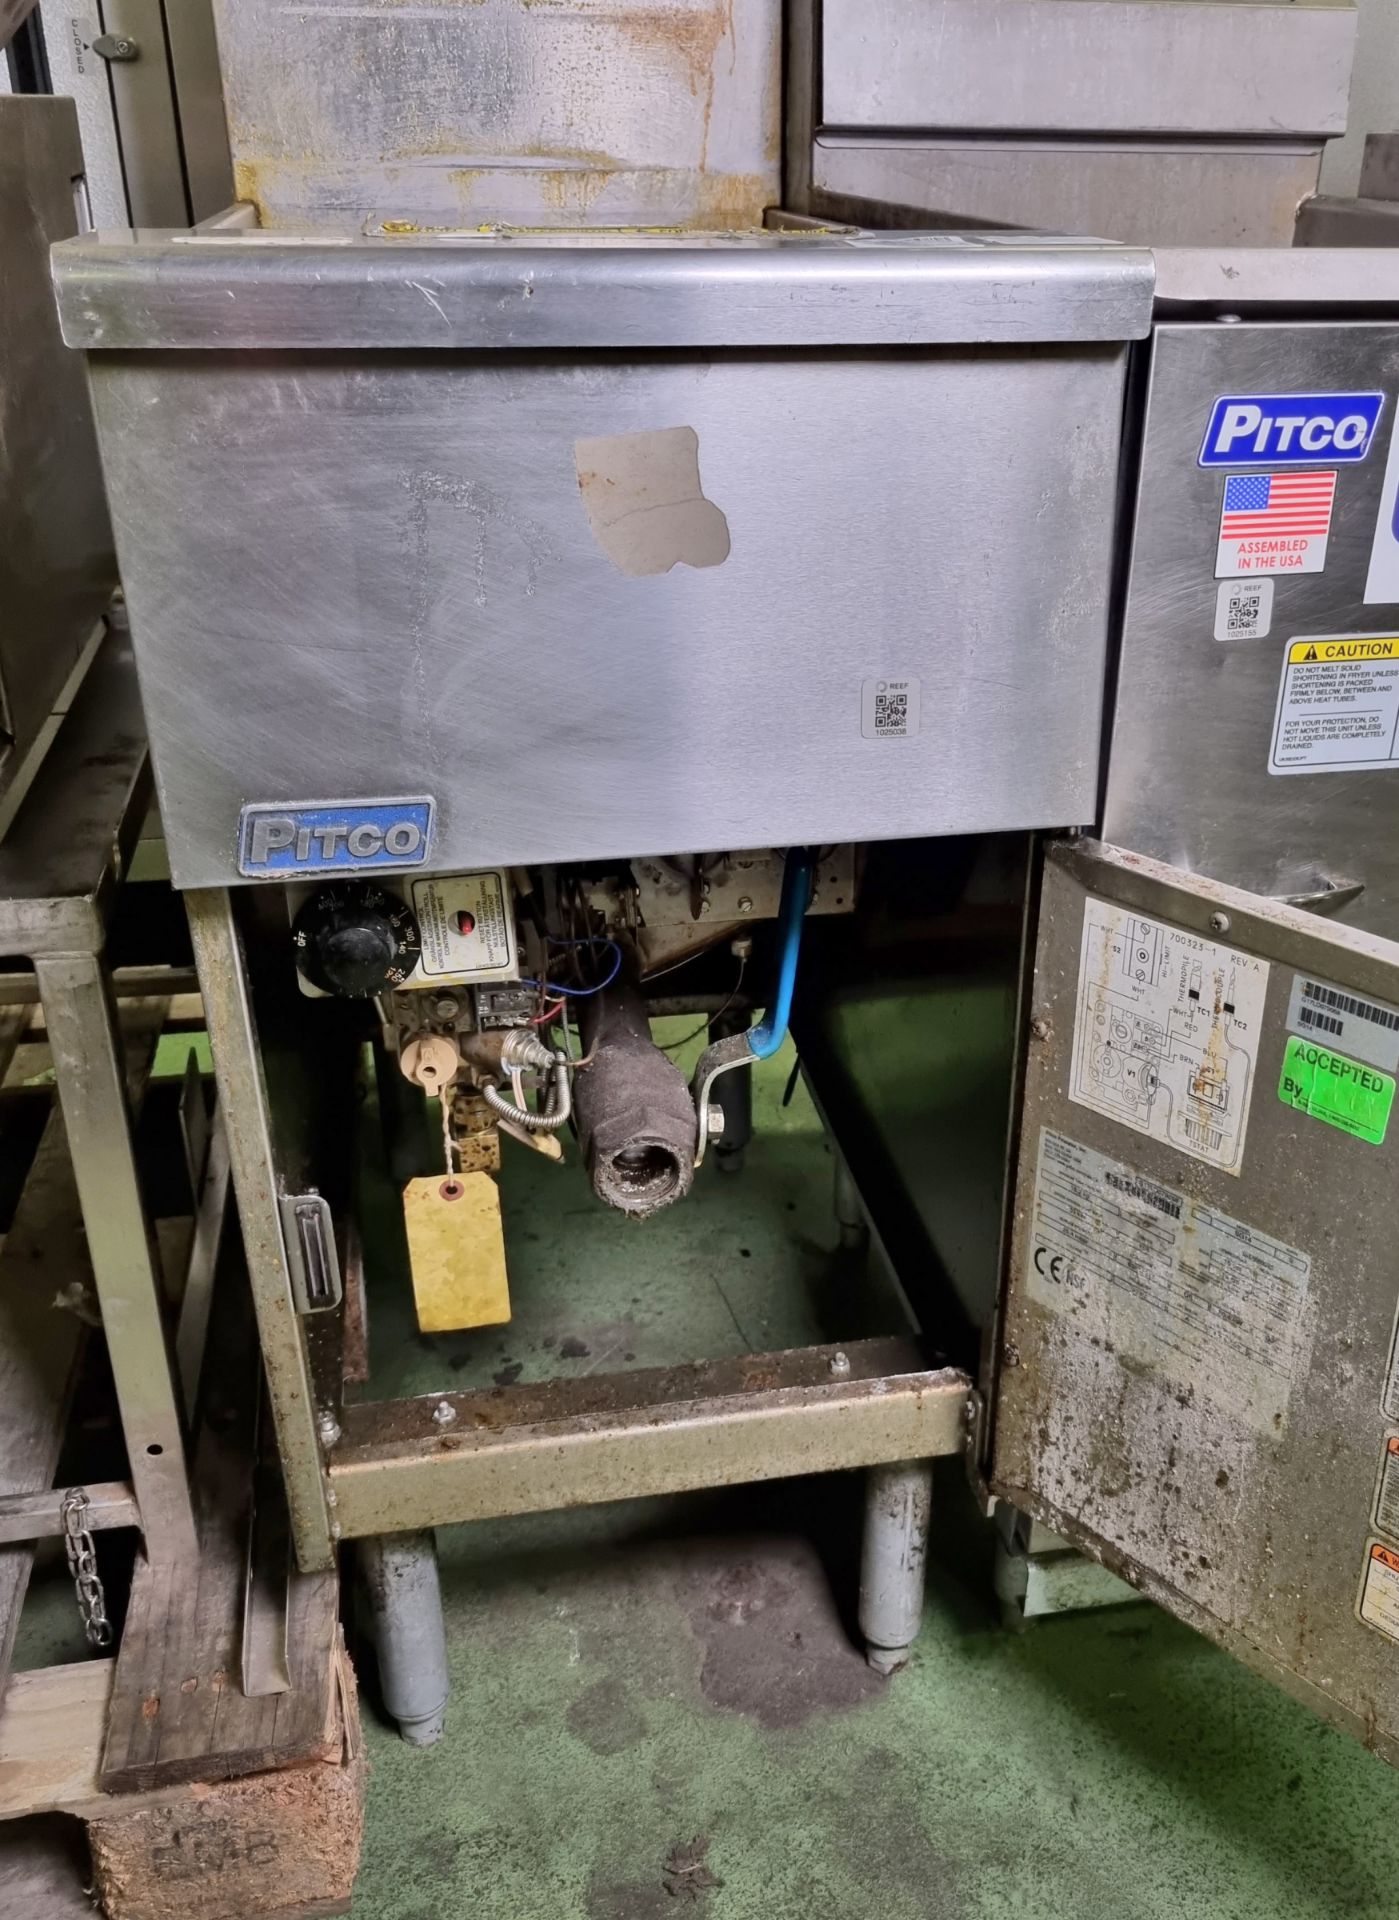 Pitco SG14 stainless steel single tank gas fryer - W 400 x D 950 x H 1170mm - MISSING BASKETS - Image 3 of 4